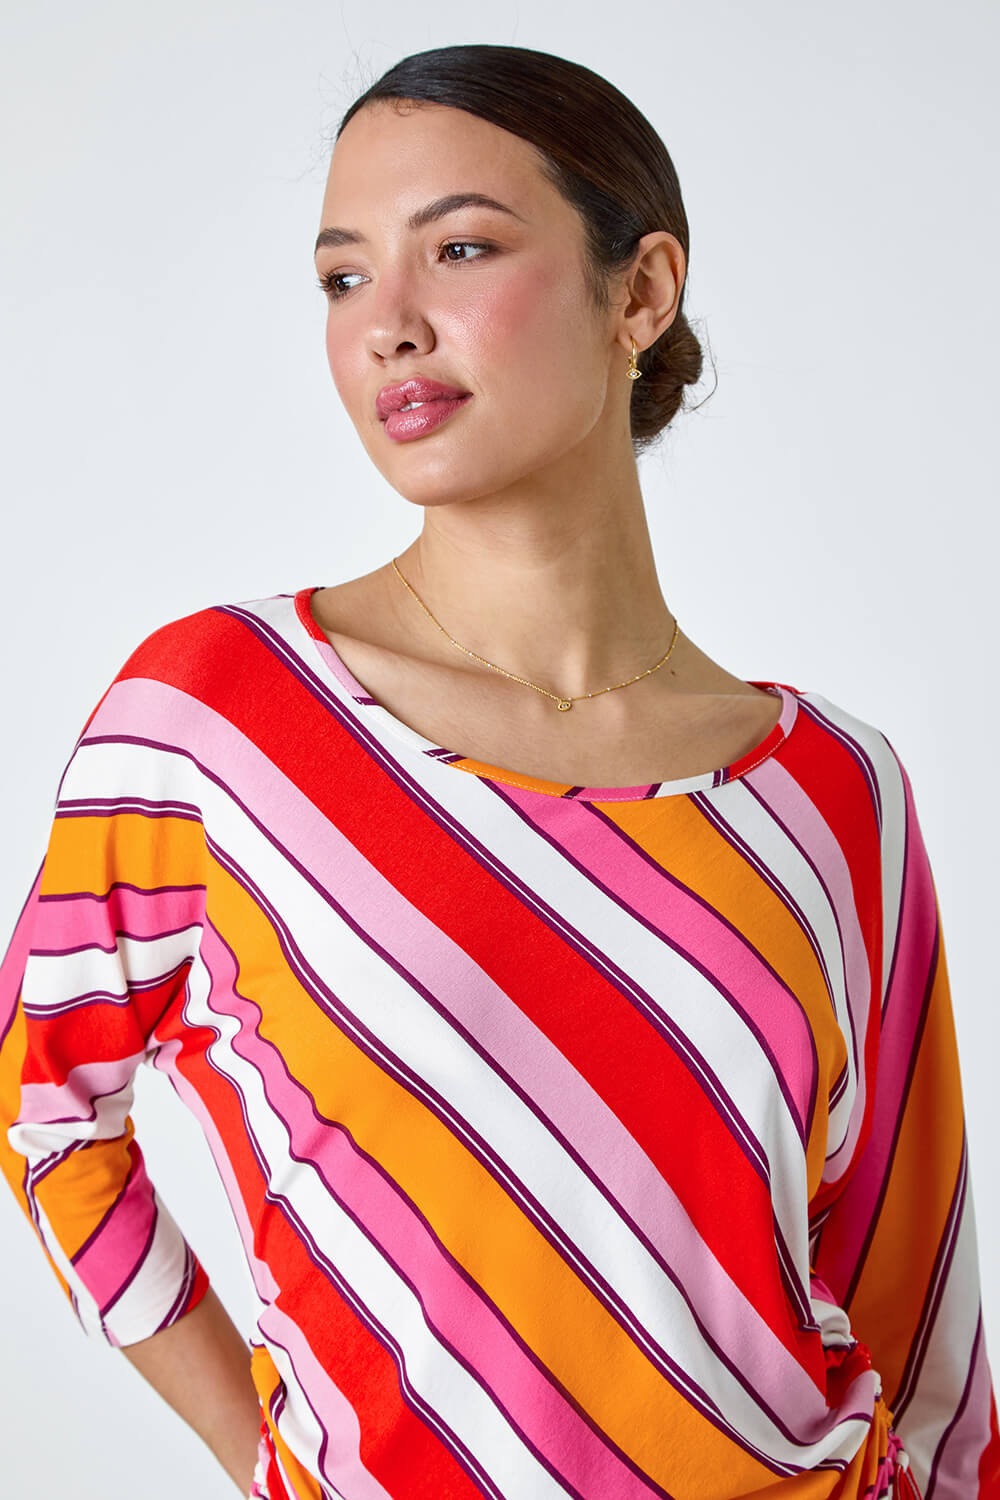 Red Stripe Print Ruched Stretch Top, Image 4 of 5